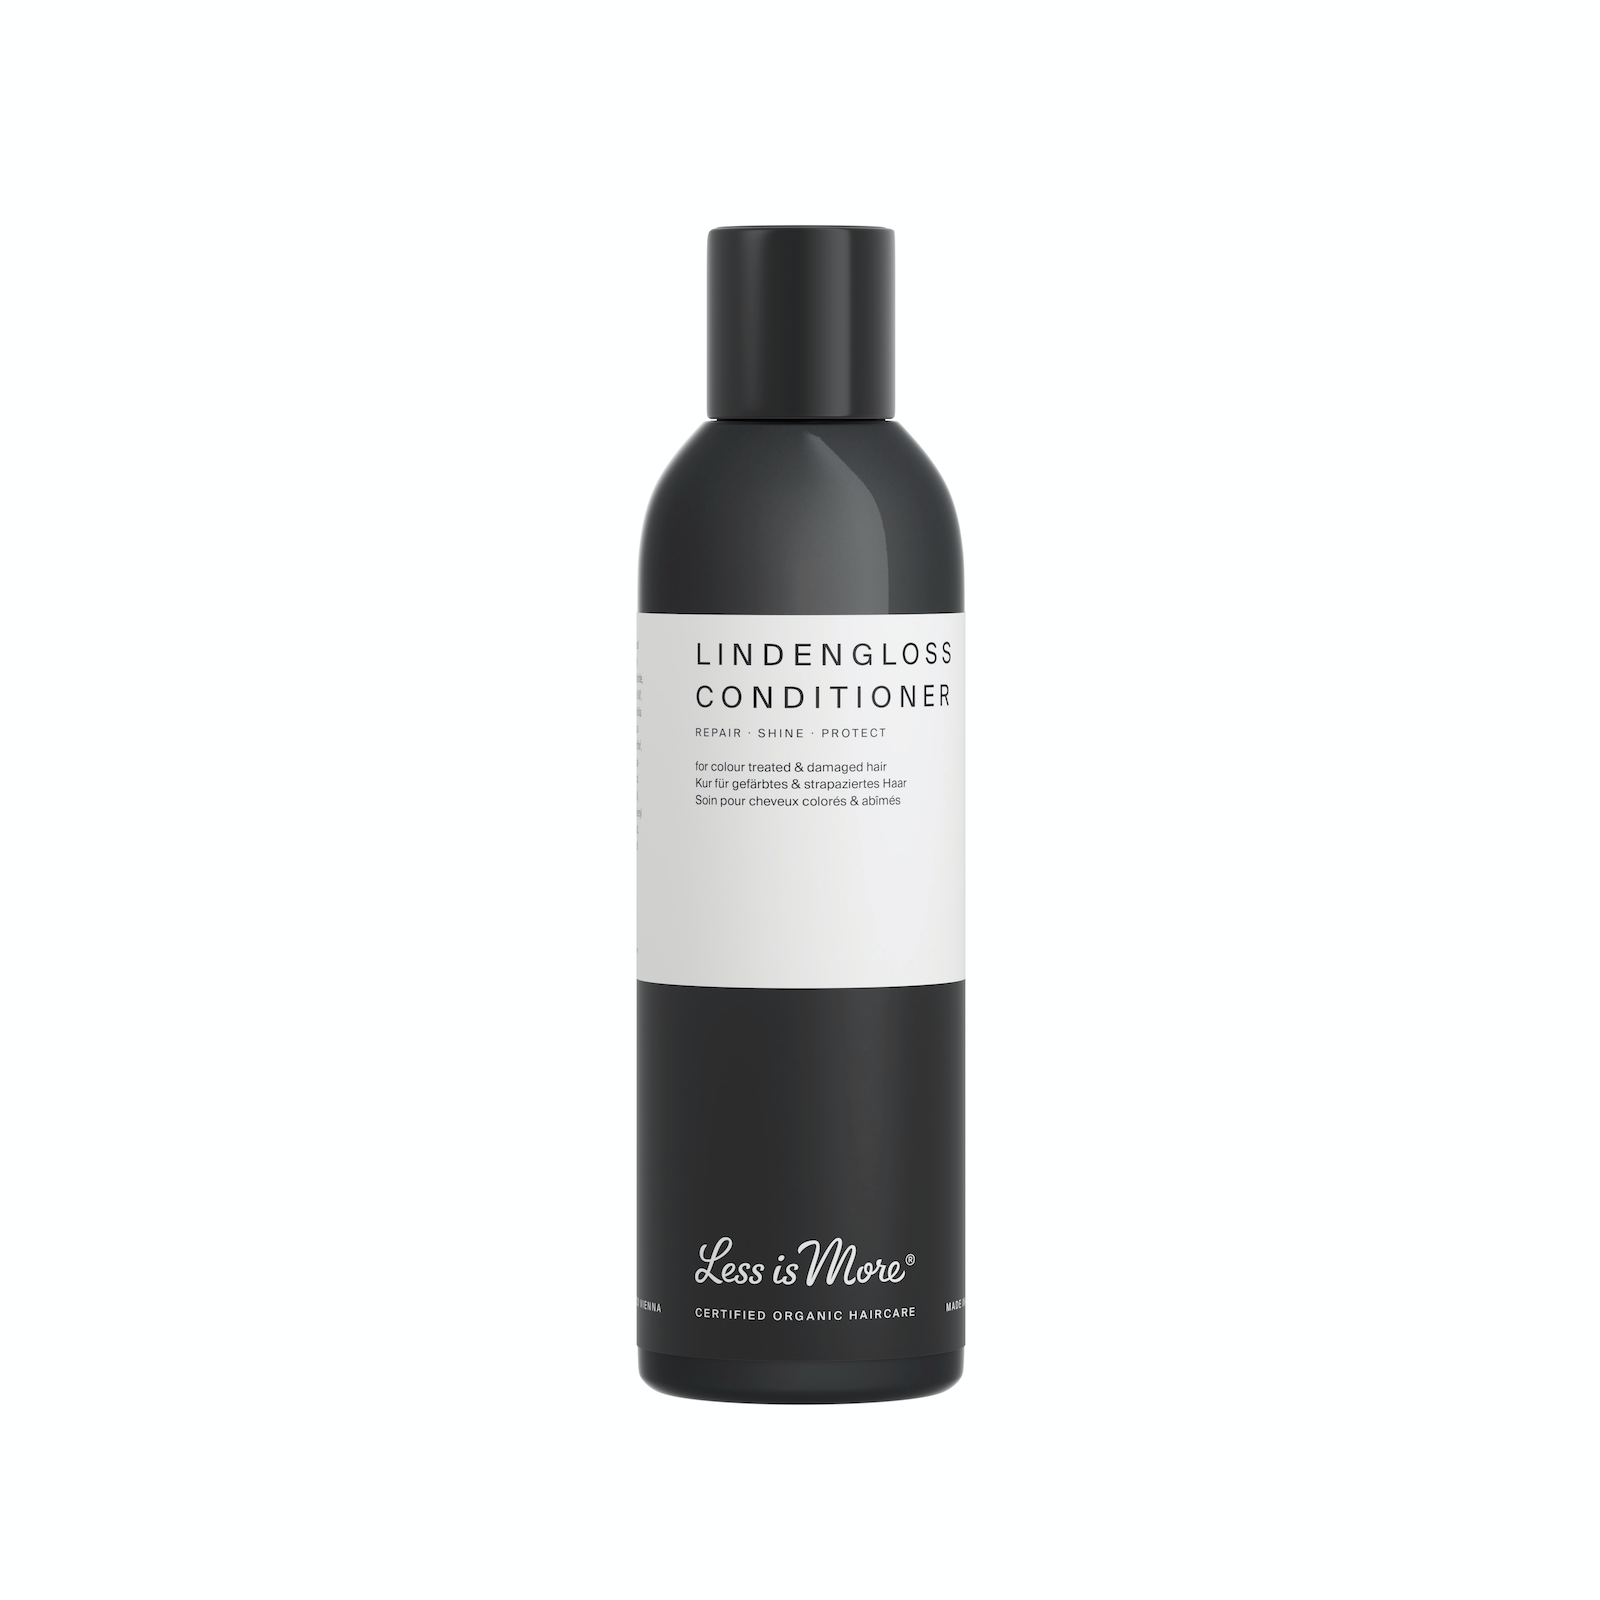 Lindengloss Conditioner 200 ml from Less Is More